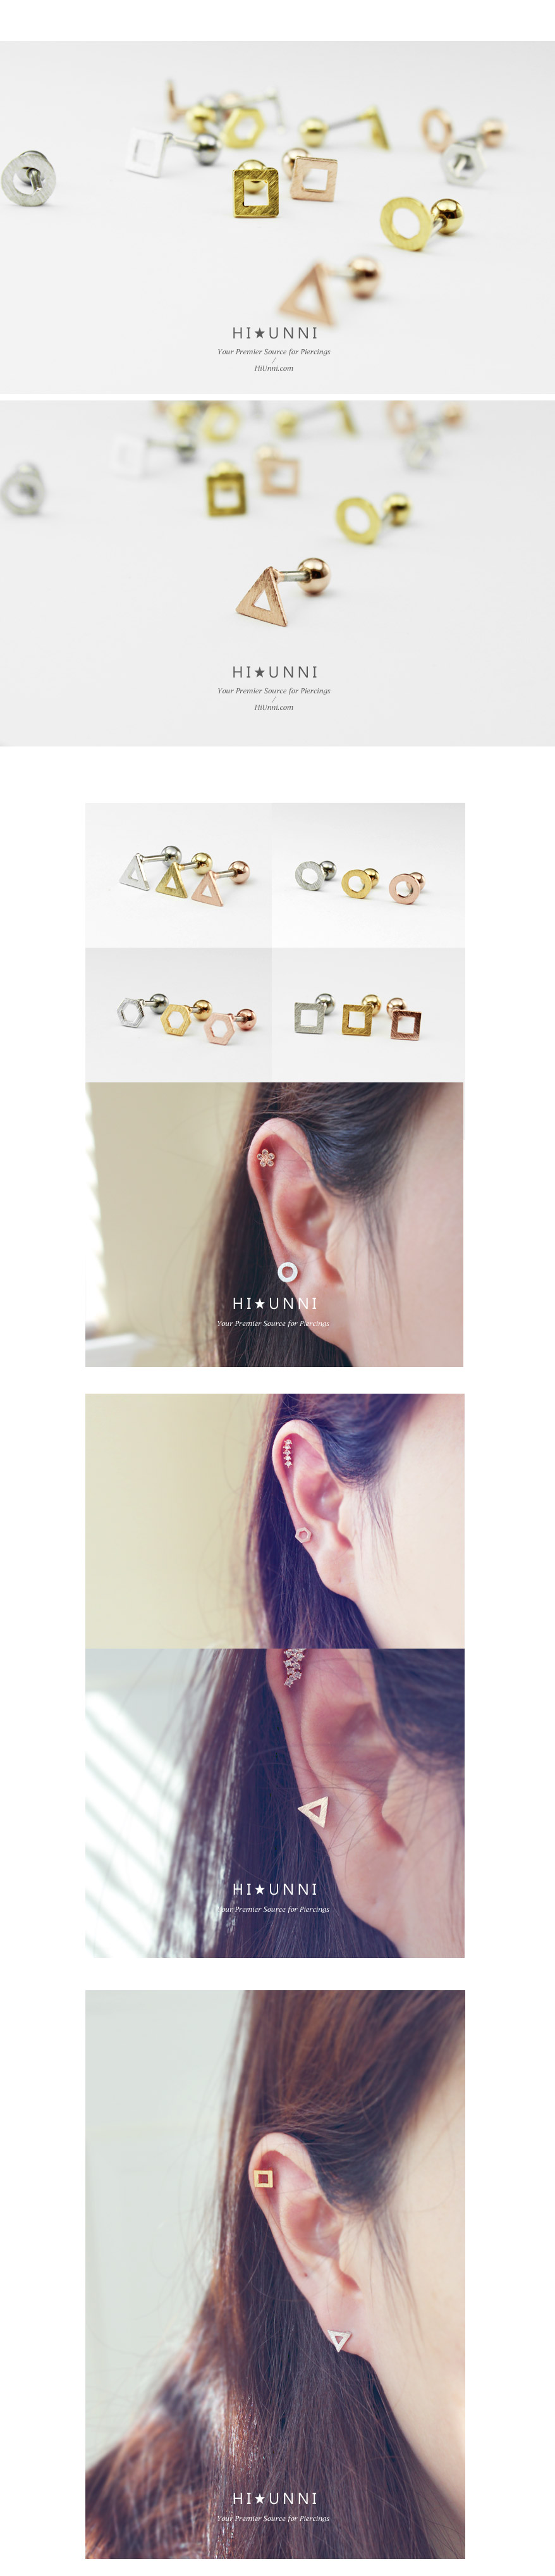 ear_studs_piercing_cartilage_earrings_16g_316l_surgical_stainless_steel_korean_asian_style_jewelry_barbell_rose_gold_helix_conch_labret_5